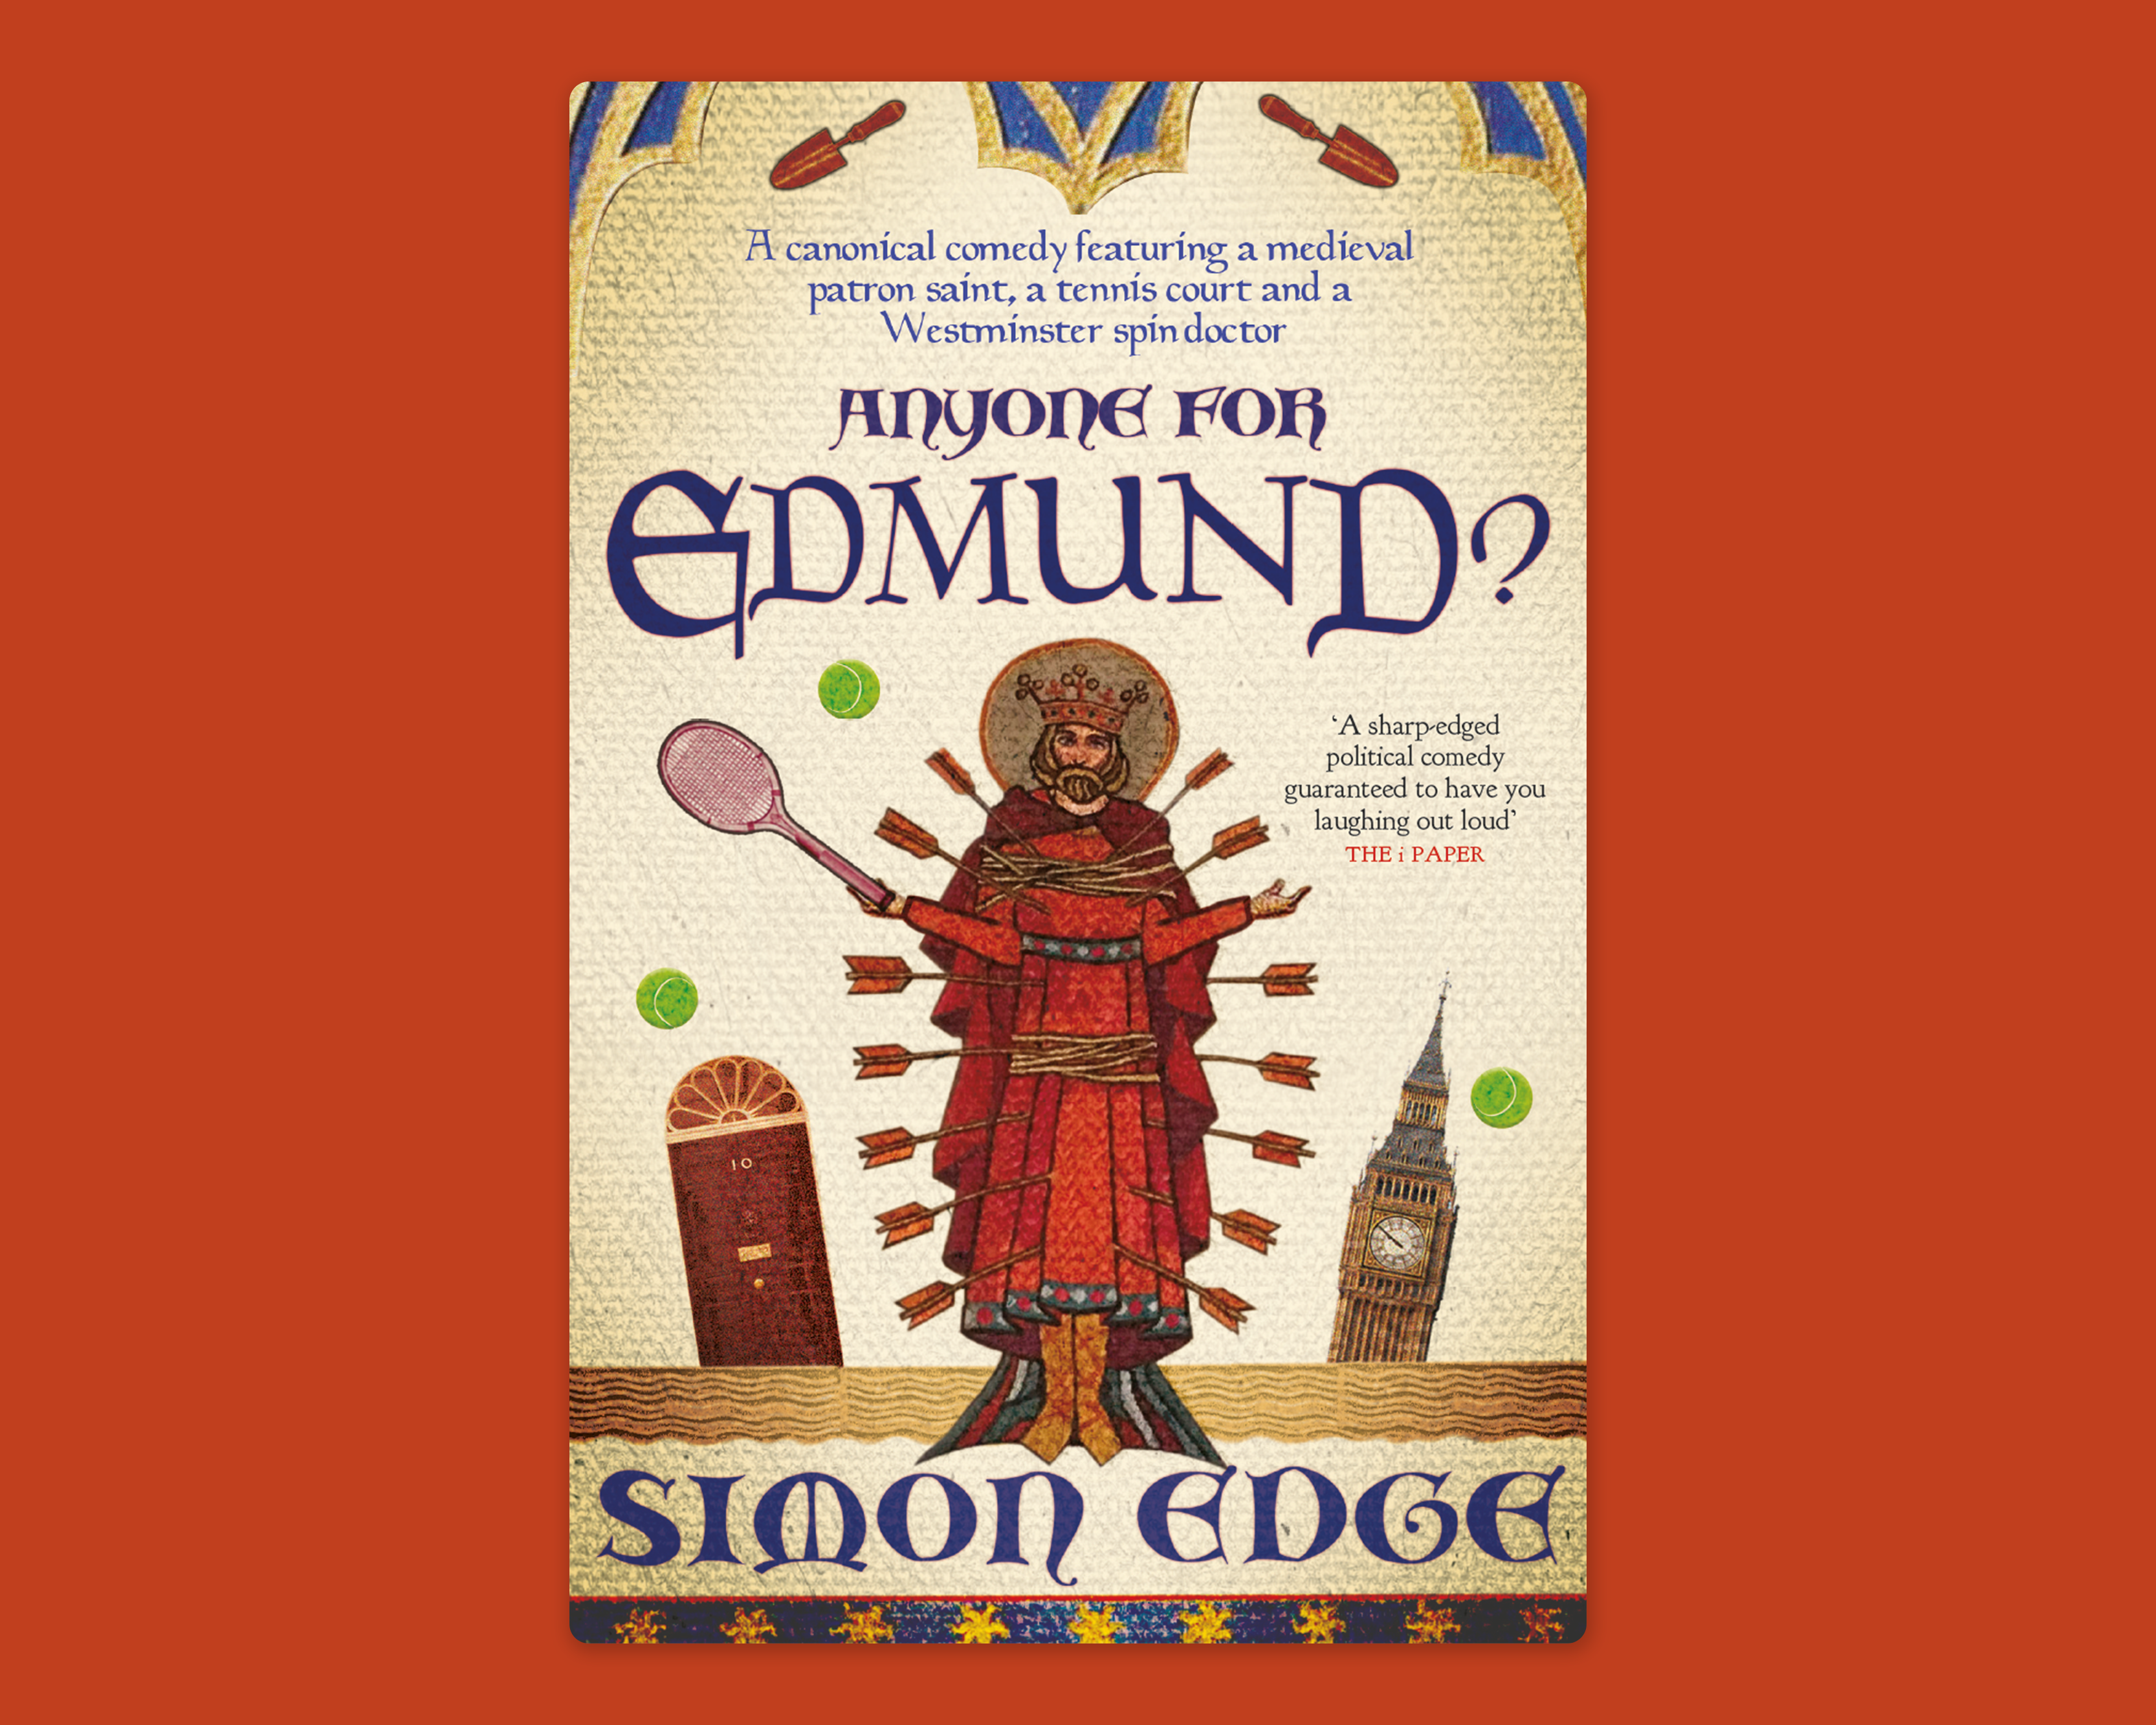 An image of the book cover for Anyone for Edmund? by Simon Edge. The cover is overlayed on a red background.